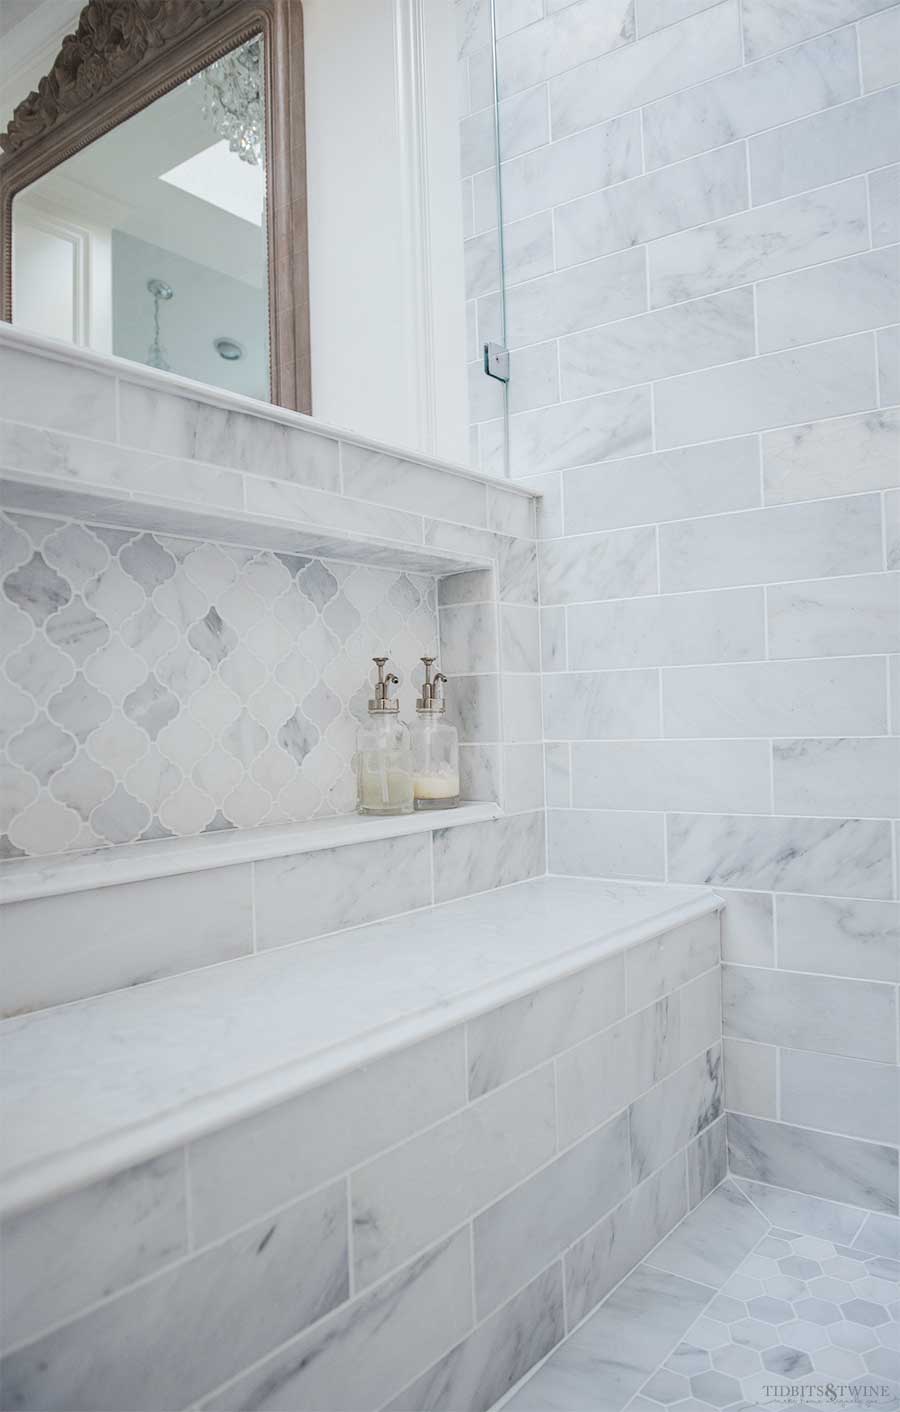 Oversized shower niche in carrara marble subway tile with quartz bench seat